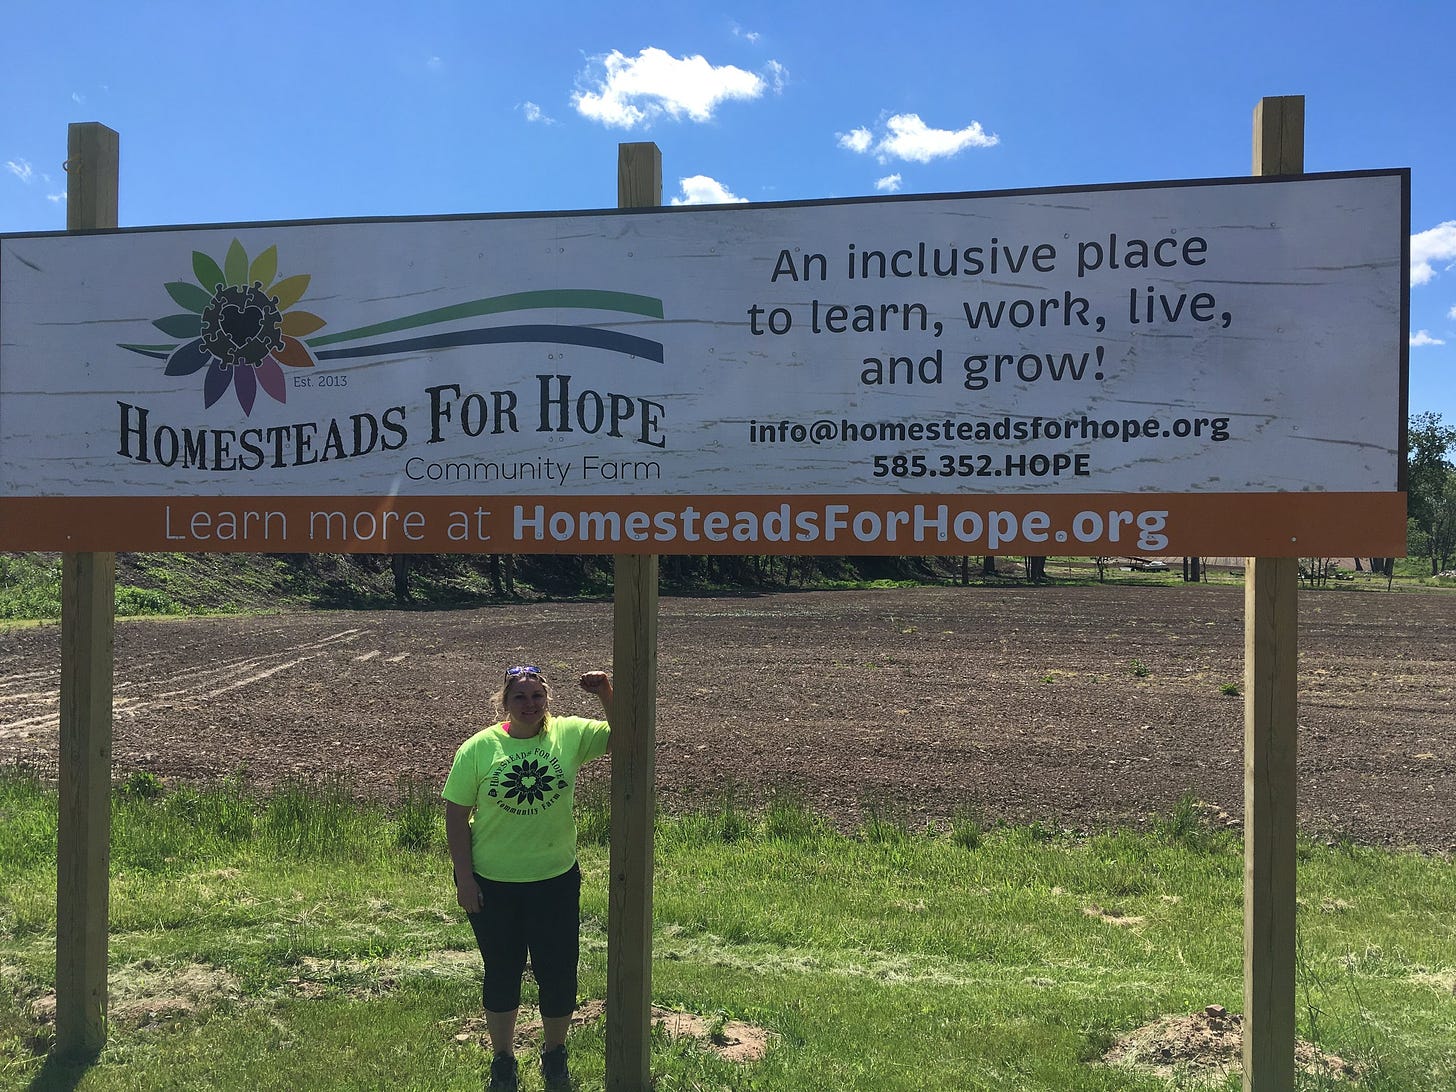 Jenny Brongo @ Homesteads for Hope